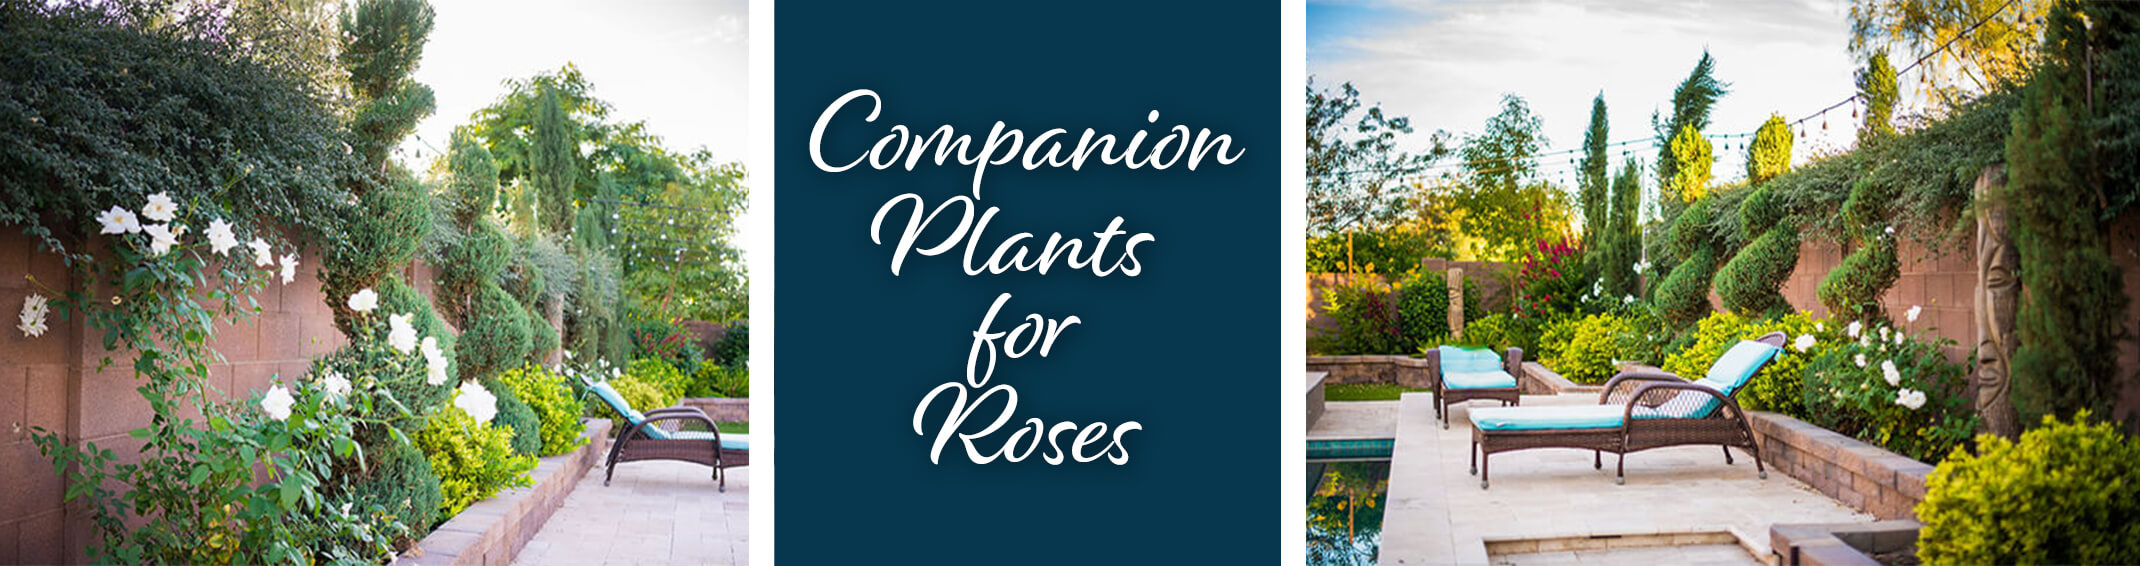 A collage with a pictures on the left and right of a garden with roses, chaise lounge chairs and other plants near a pool, with a dark turquoise blue box between the imiages and the text "Companion Plants for Roses" written on it in white